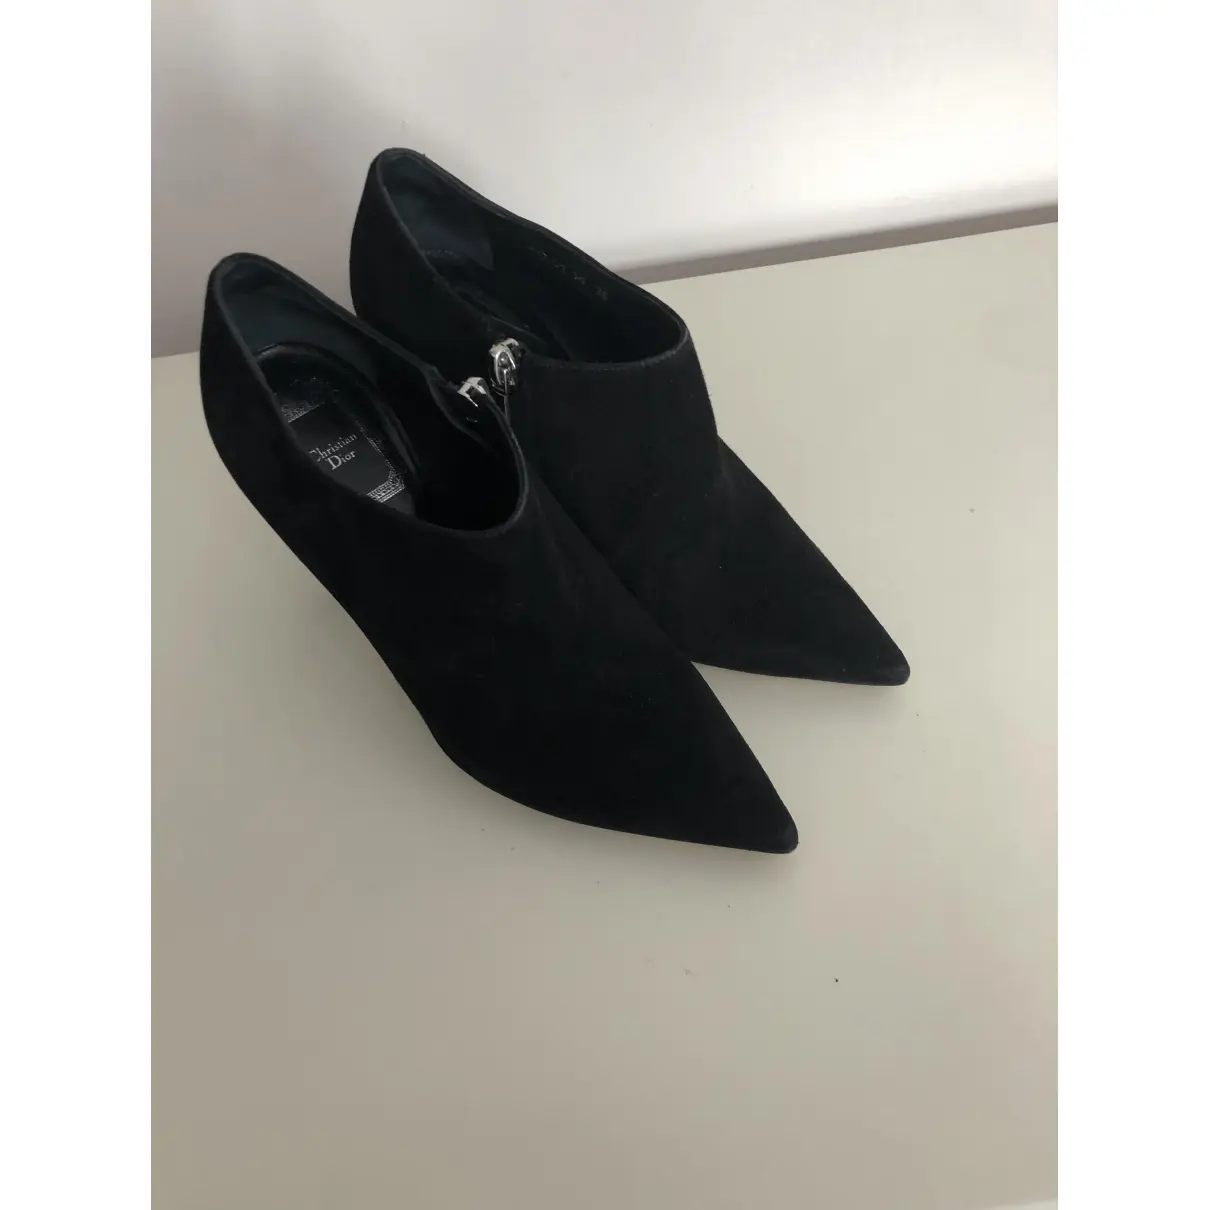 Buy Dior Ankle boots online